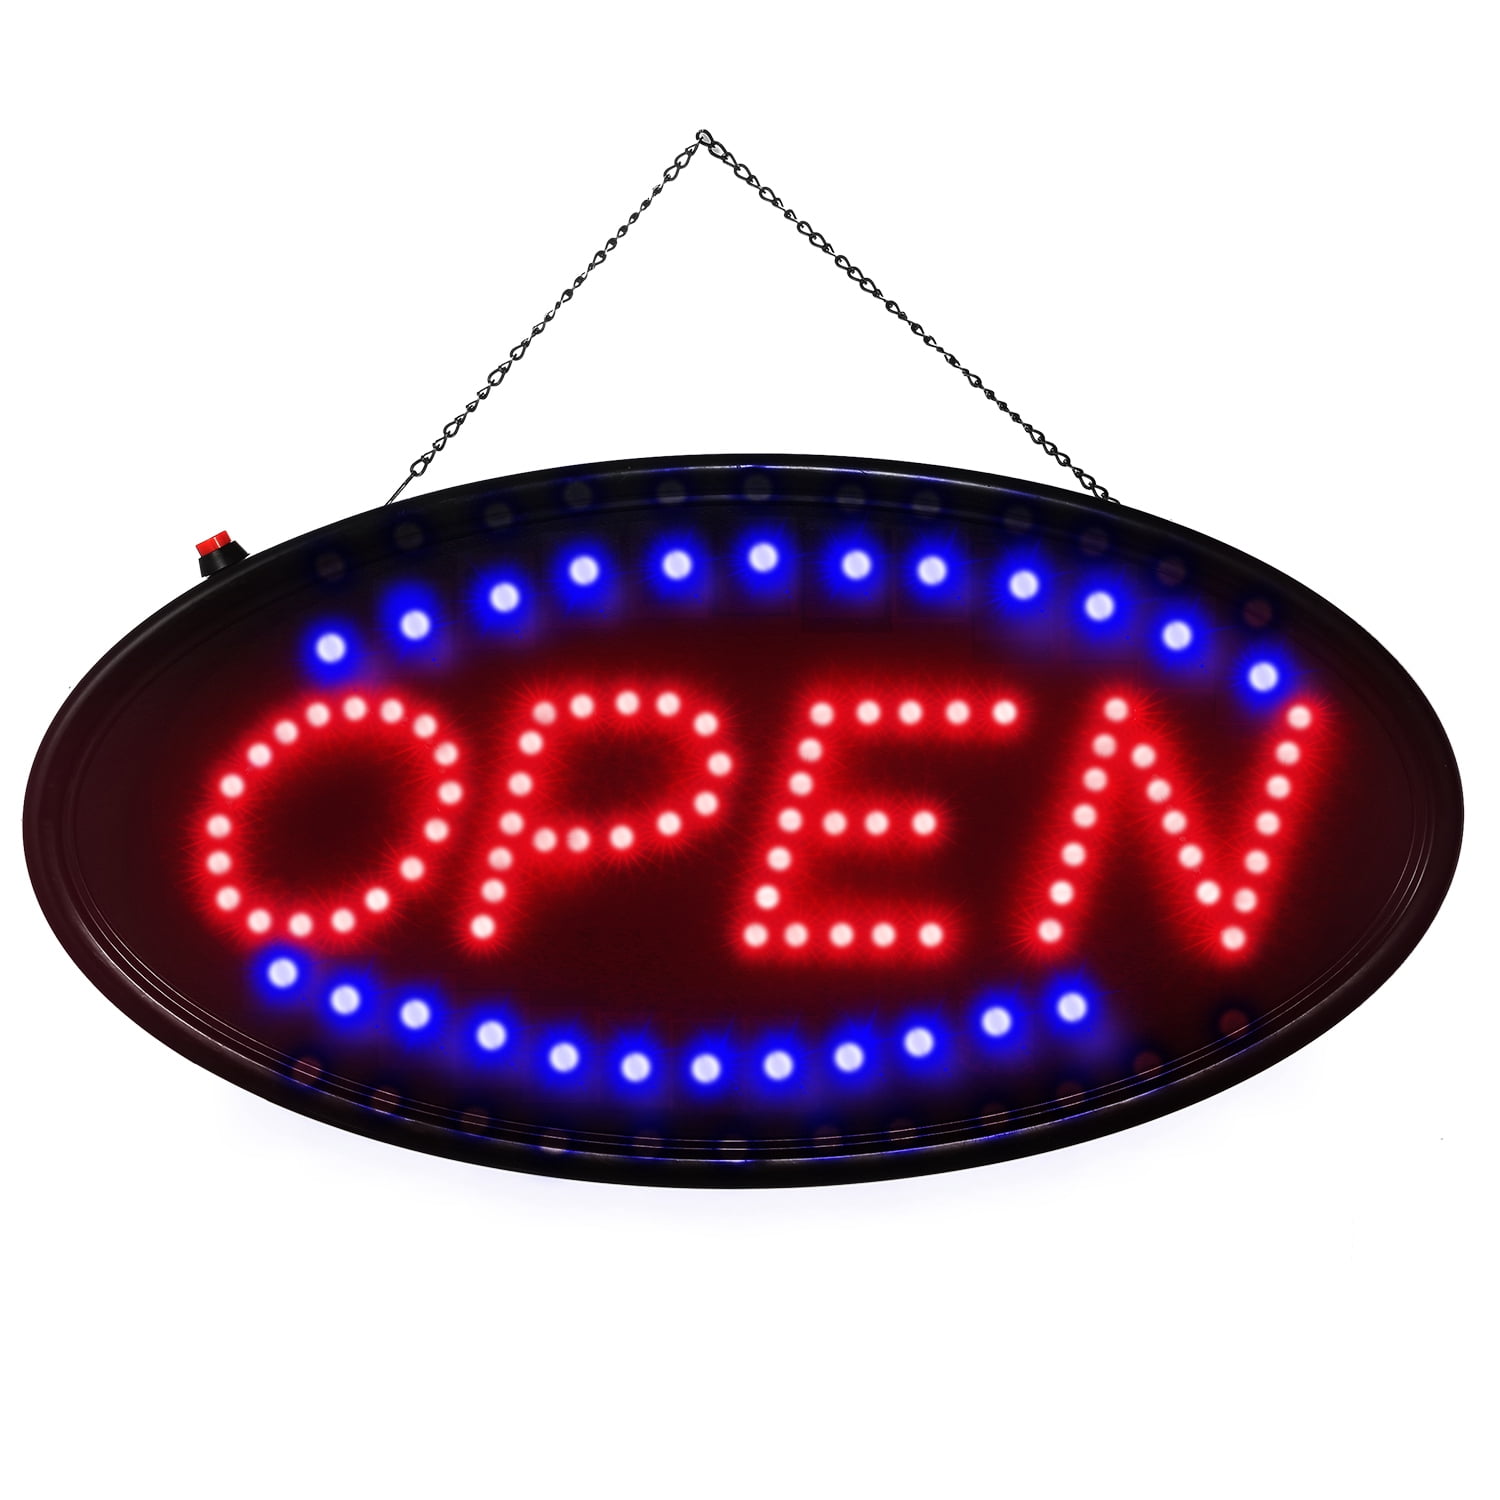 USA】110V LED Light Flash Motion Business Open Sign Chain Switch 25*48 